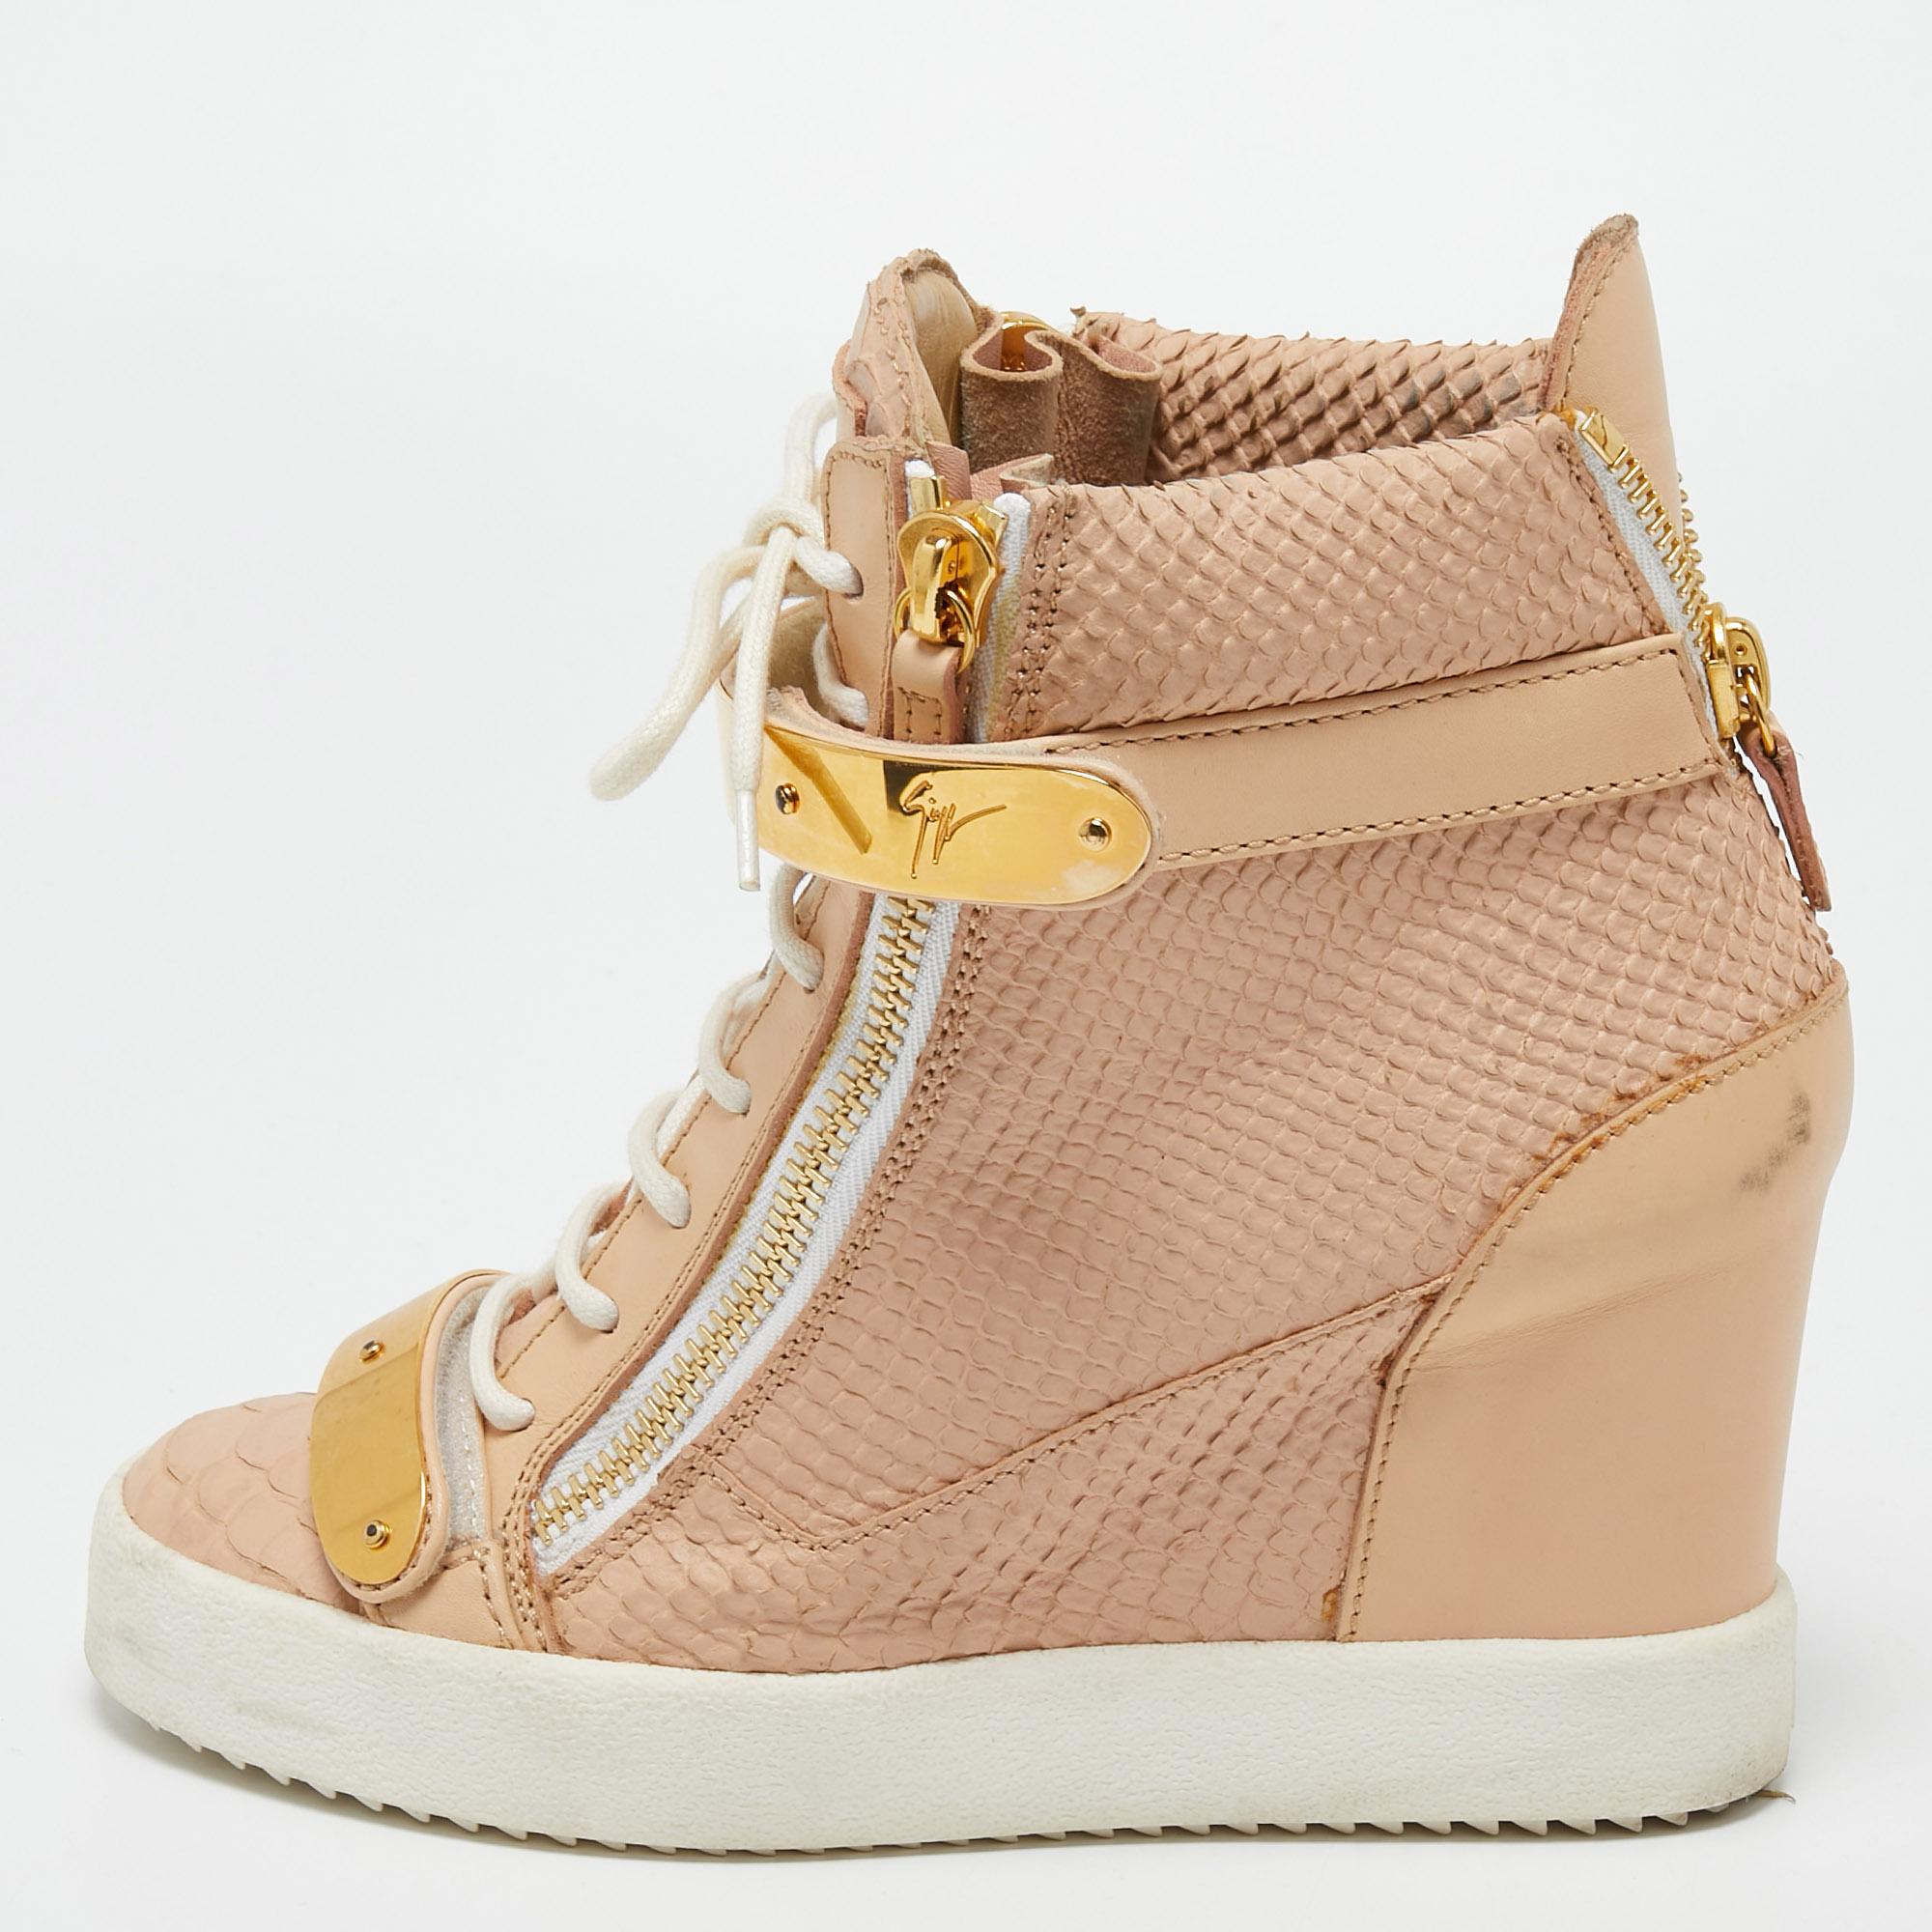 These sneakers by Giuseppe Zanotti are meant to be flaunted. Crafted from leather they feature a gorgeous python embossed exterior with gold tone zipper details on the front and at the rear. The pair is beautifully completed with concealed wedges and gold tone velcro straps on the toe and ankle. Own these beauties today and step out in them like a fashionista